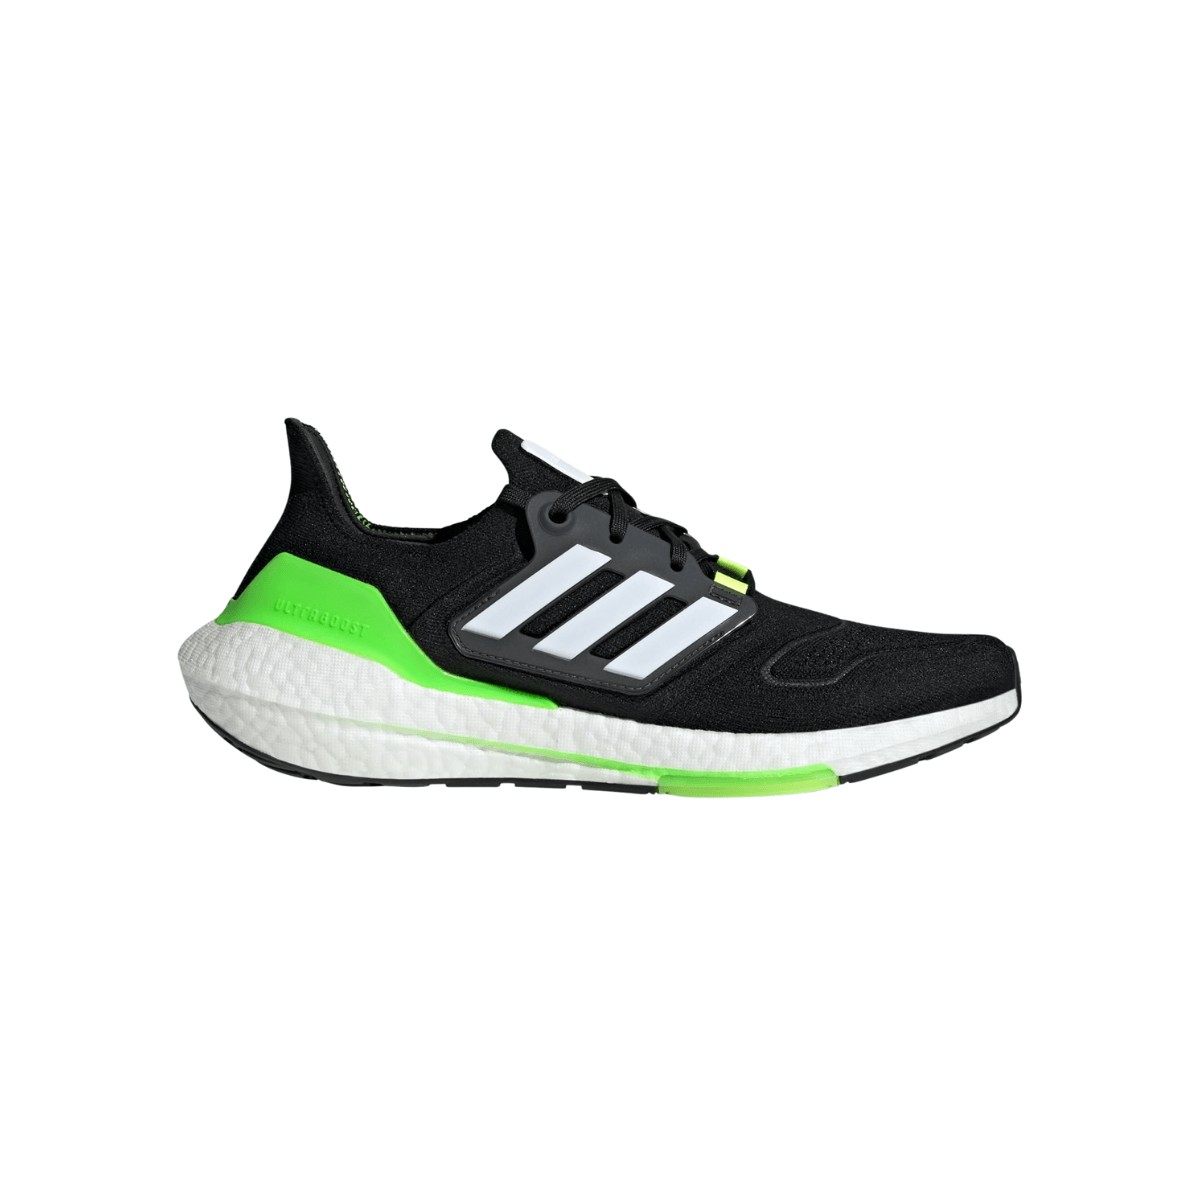 Adidas Ultraboost 22 Shoes Black White Green SS22, Size UK 8